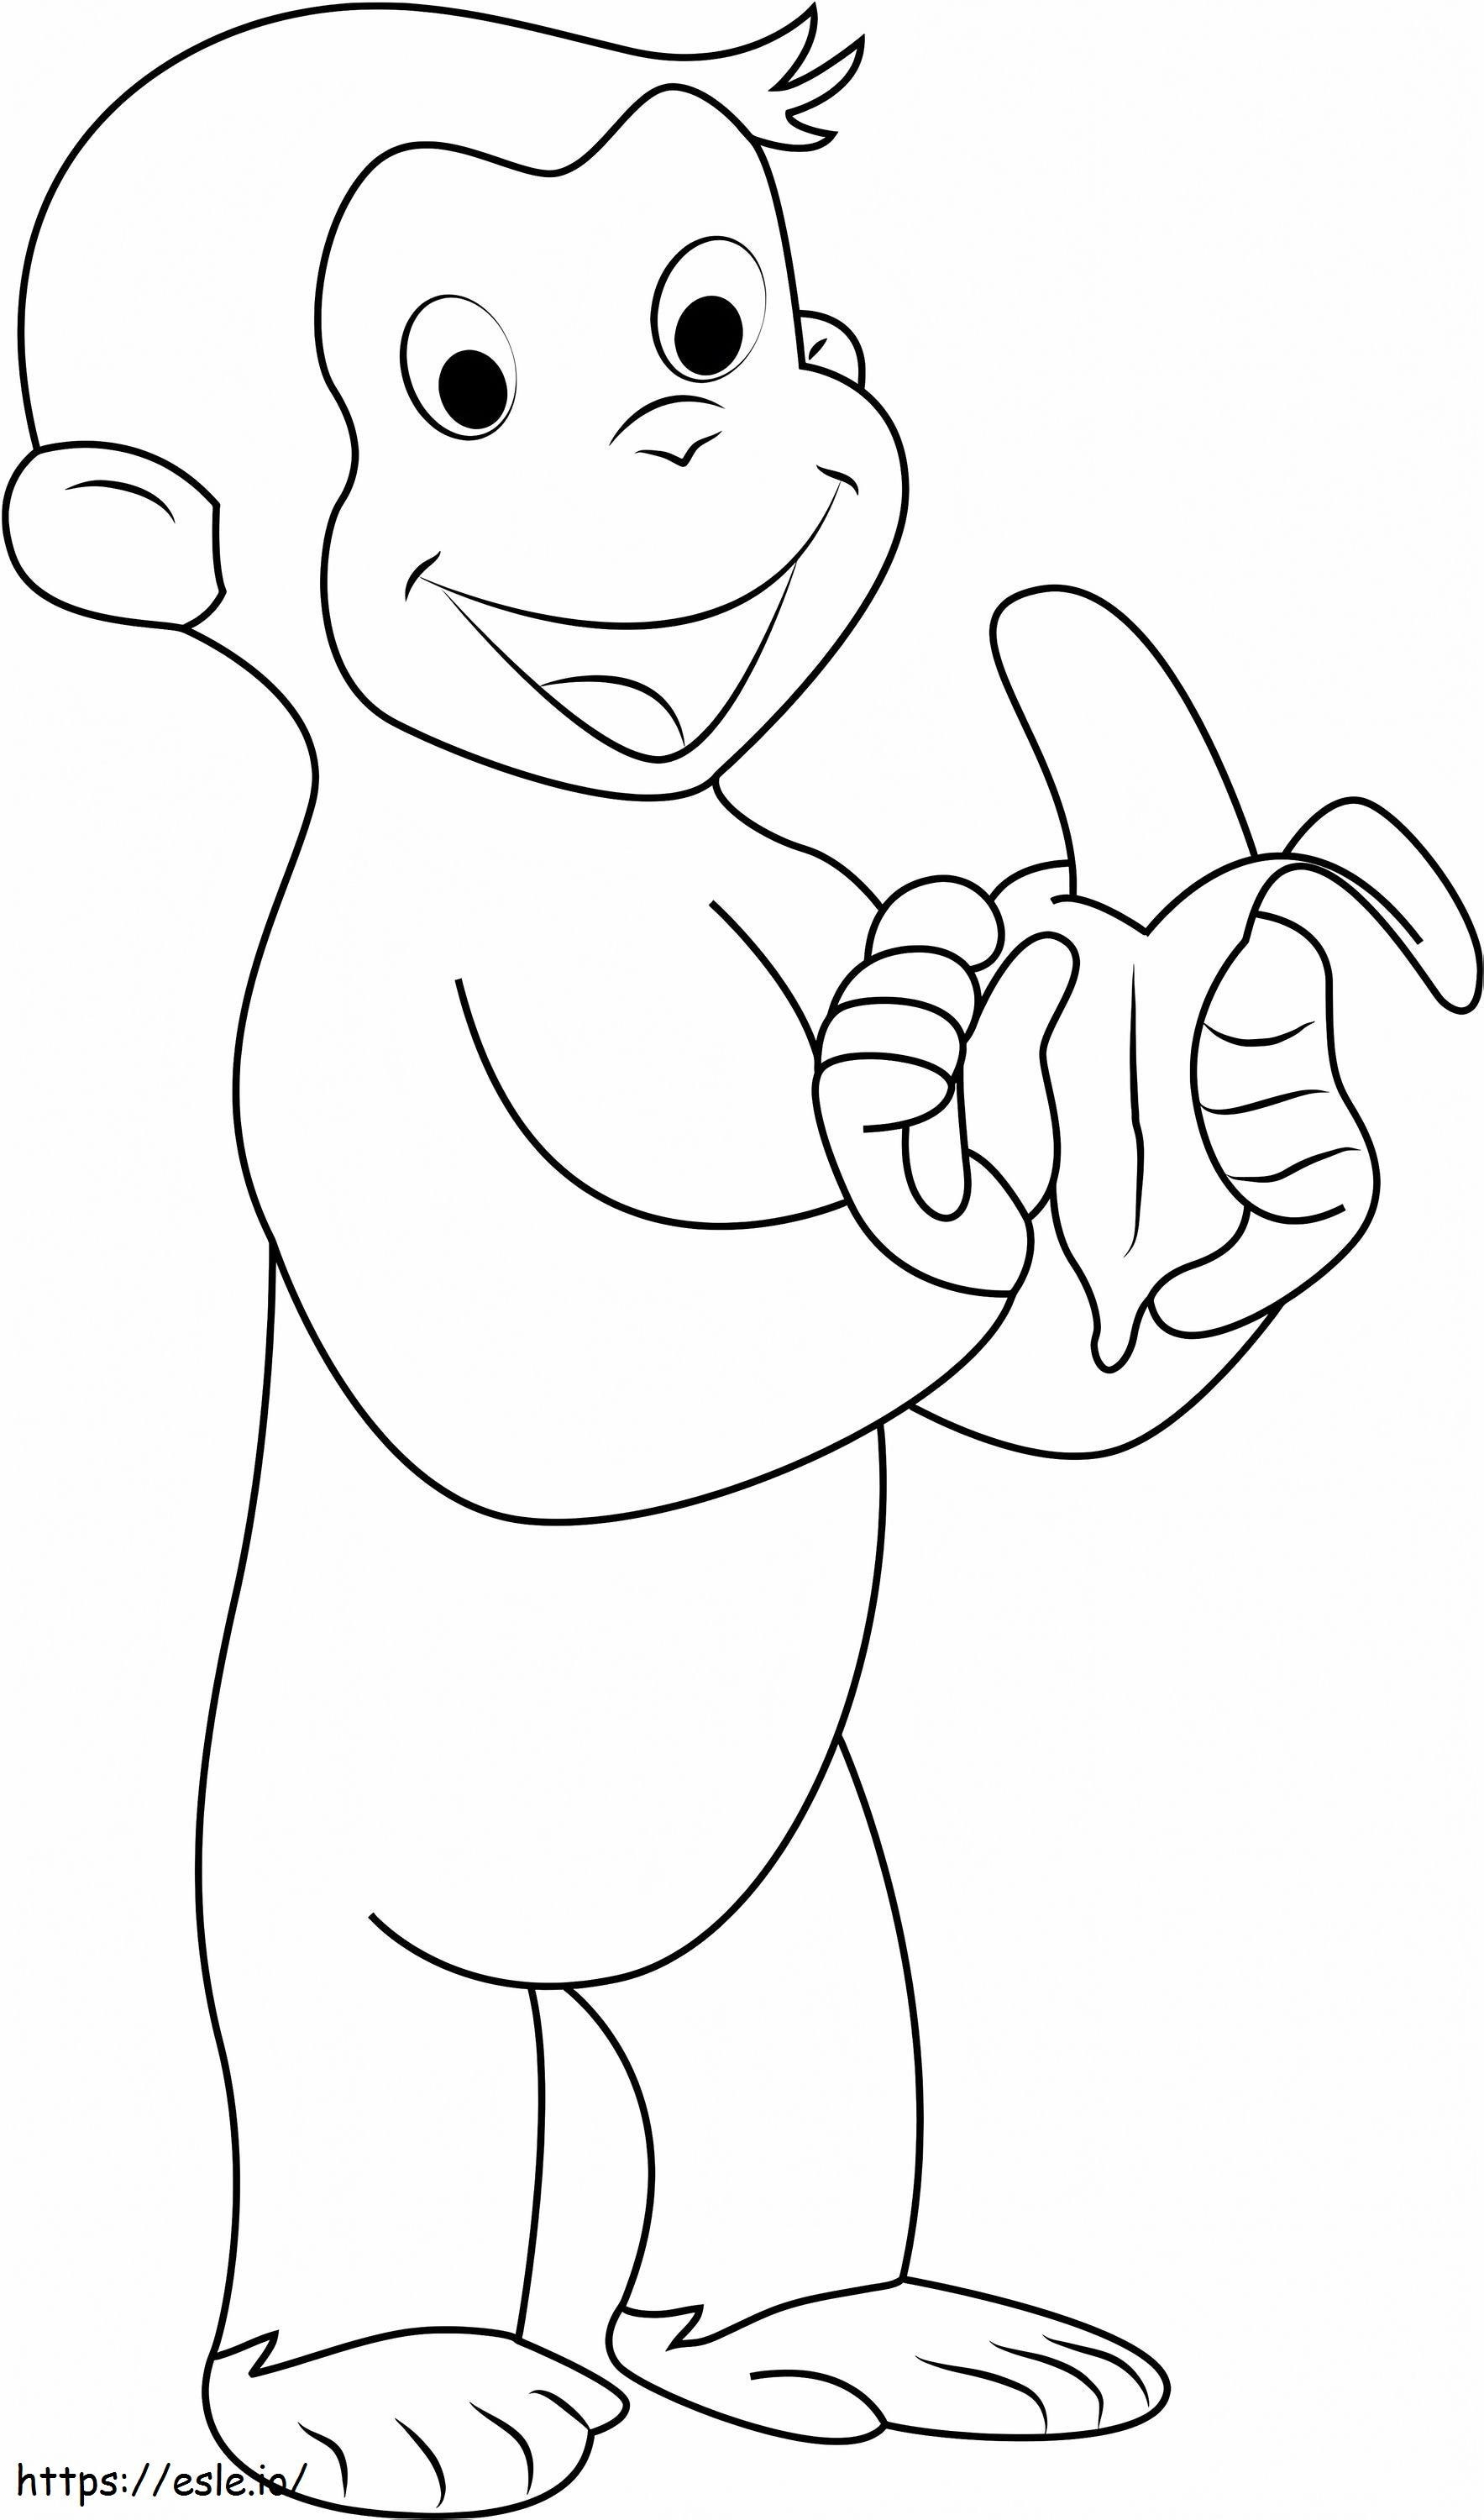 Curious George Eating Banana1 coloring page